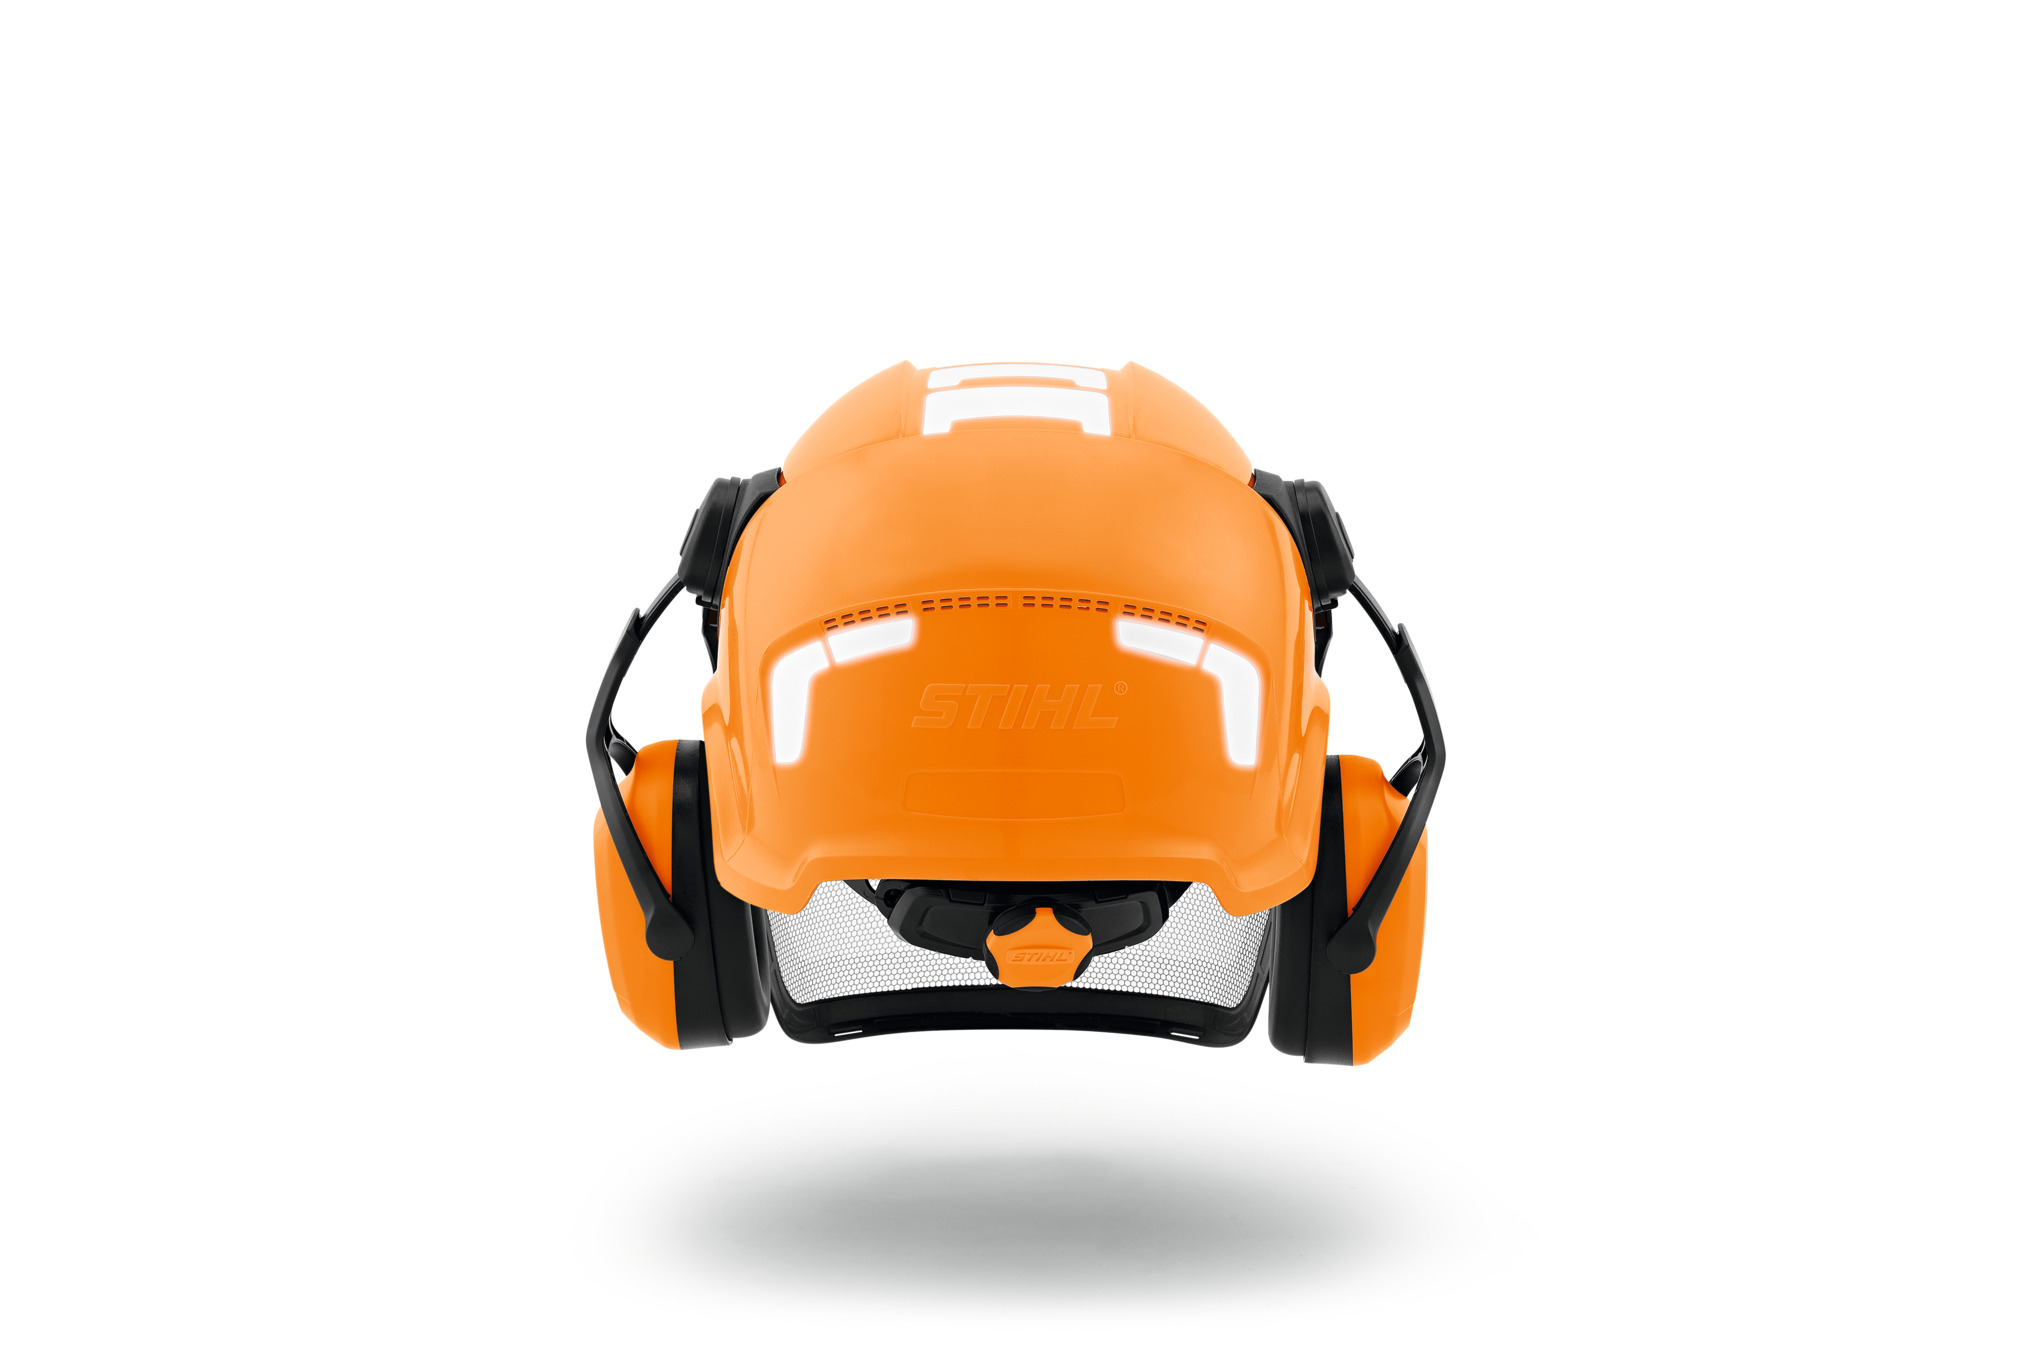 Casque forestier Complet - Stihl